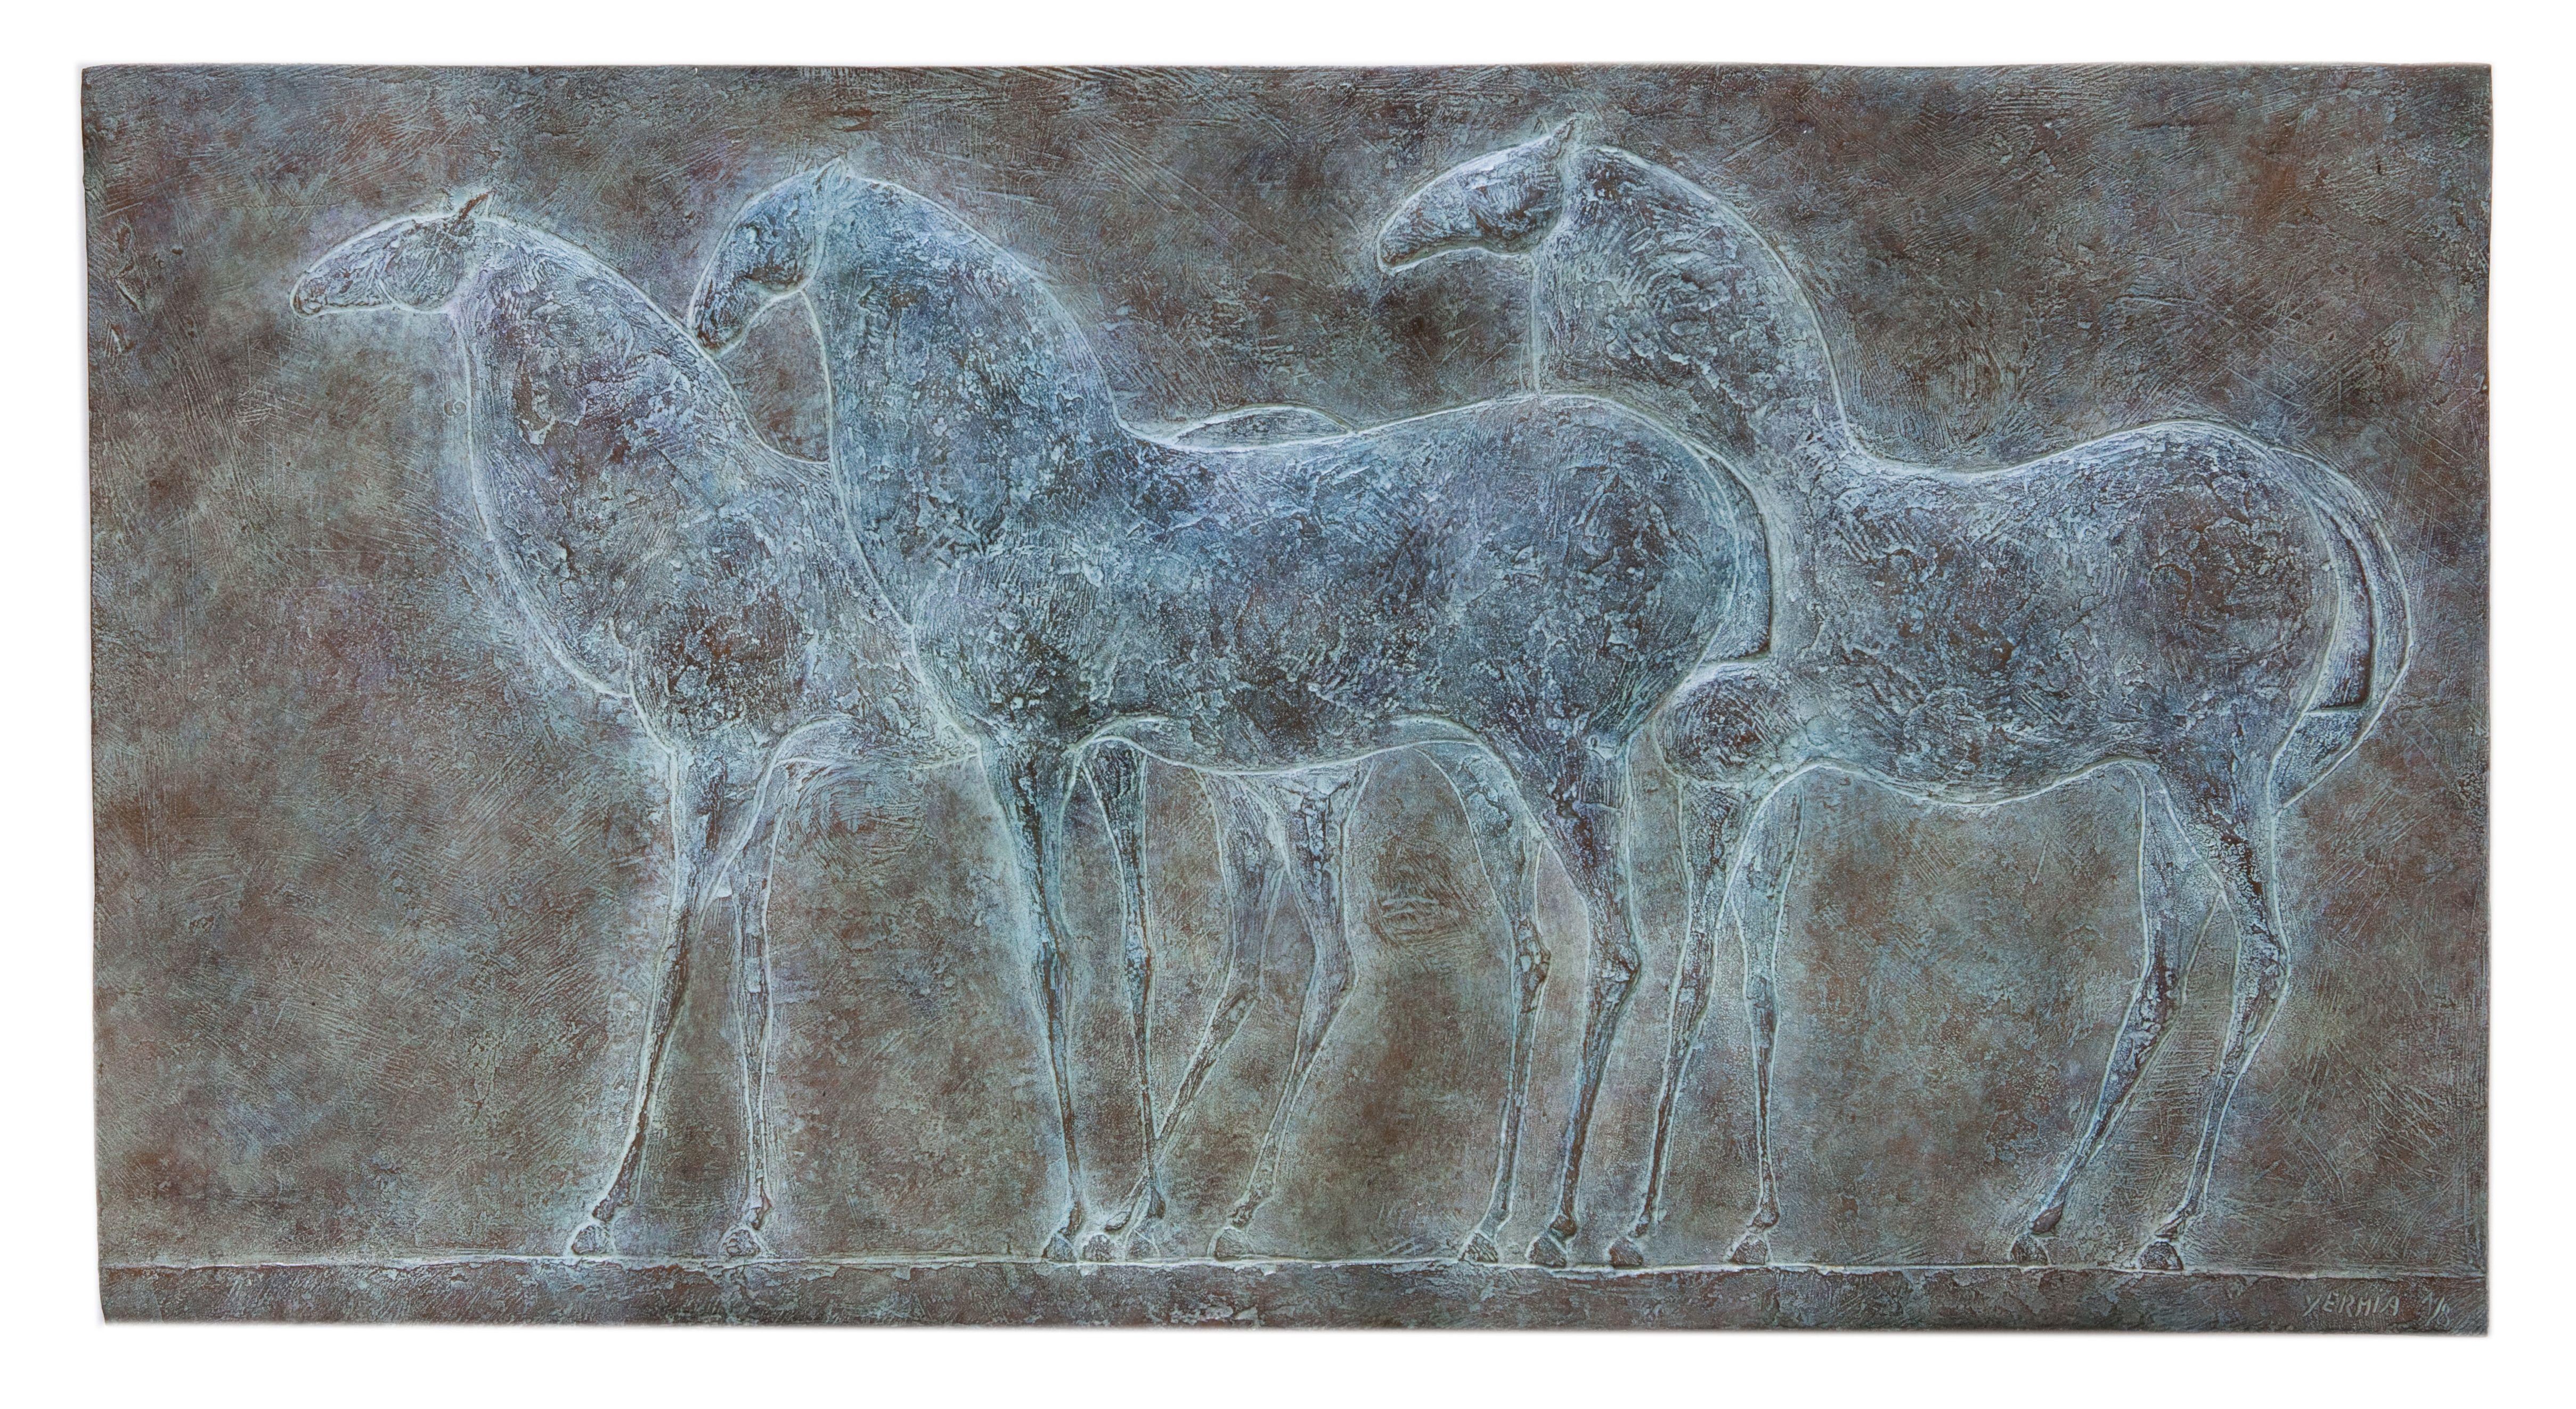 Three Horses is a bronze bas-relief sculpture by French contemporary artist Pierre Yermia, dimensions are 42 × 81 × 2 cm (16.5 × 31.9 × 0.8 in). 
The sculpture is signed and numbered, it is part of a limited edition of 8 editions + 4 artist’s